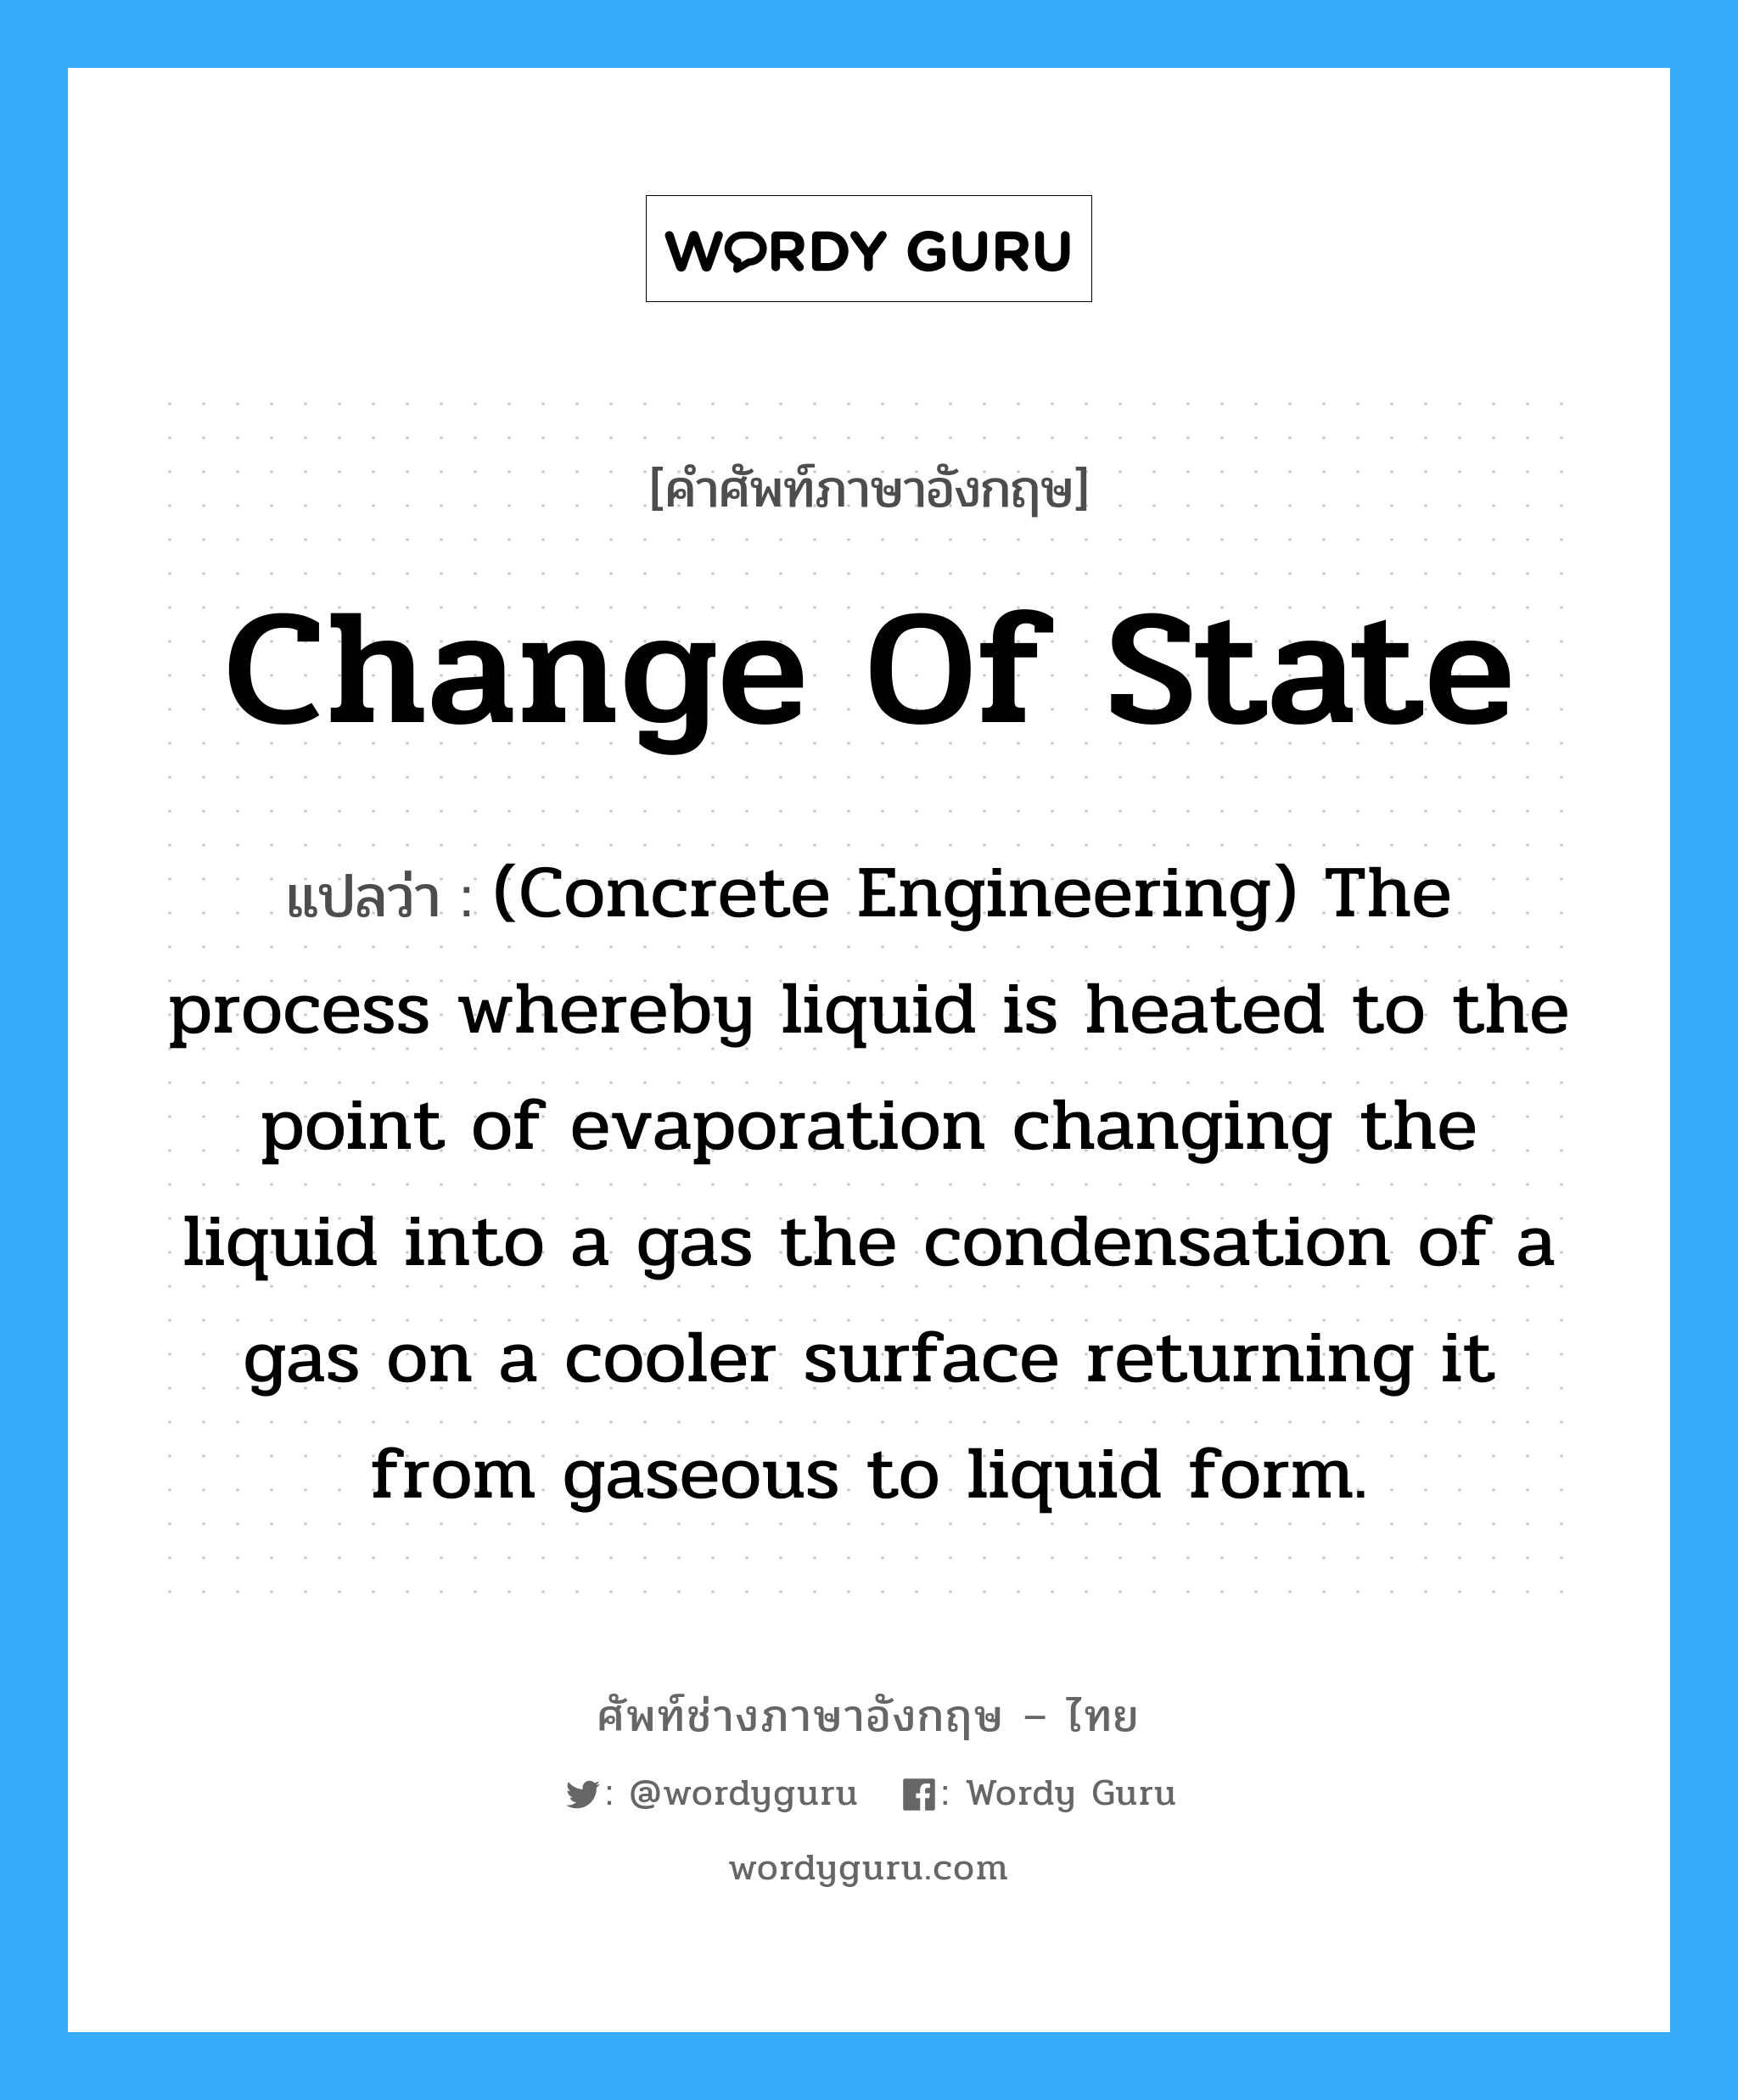 (Concrete Engineering) The process whereby liquid is heated to the point of evaporation changing the liquid into a gas the condensation of a gas on a cooler surface returning it from gaseous to liquid form. ภาษาอังกฤษ?, คำศัพท์ช่างภาษาอังกฤษ - ไทย (Concrete Engineering) The process whereby liquid is heated to the point of evaporation changing the liquid into a gas the condensation of a gas on a cooler surface returning it from gaseous to liquid form. คำศัพท์ภาษาอังกฤษ (Concrete Engineering) The process whereby liquid is heated to the point of evaporation changing the liquid into a gas the condensation of a gas on a cooler surface returning it from gaseous to liquid form. แปลว่า Change of State